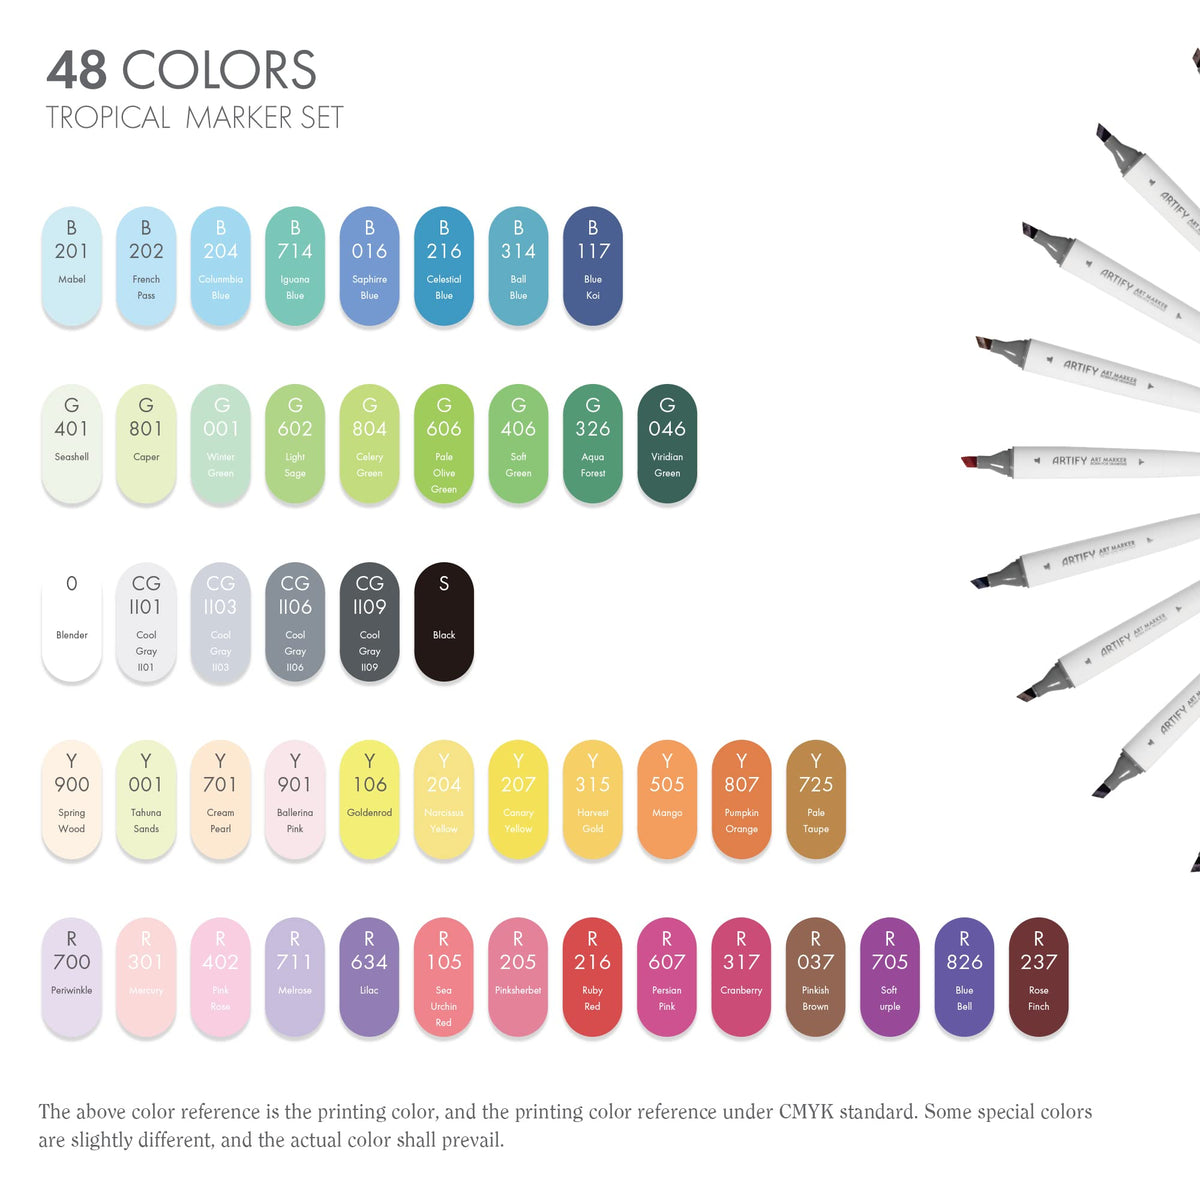 ARTIFY art supplies The Bundle of 48 Color Alcohol India